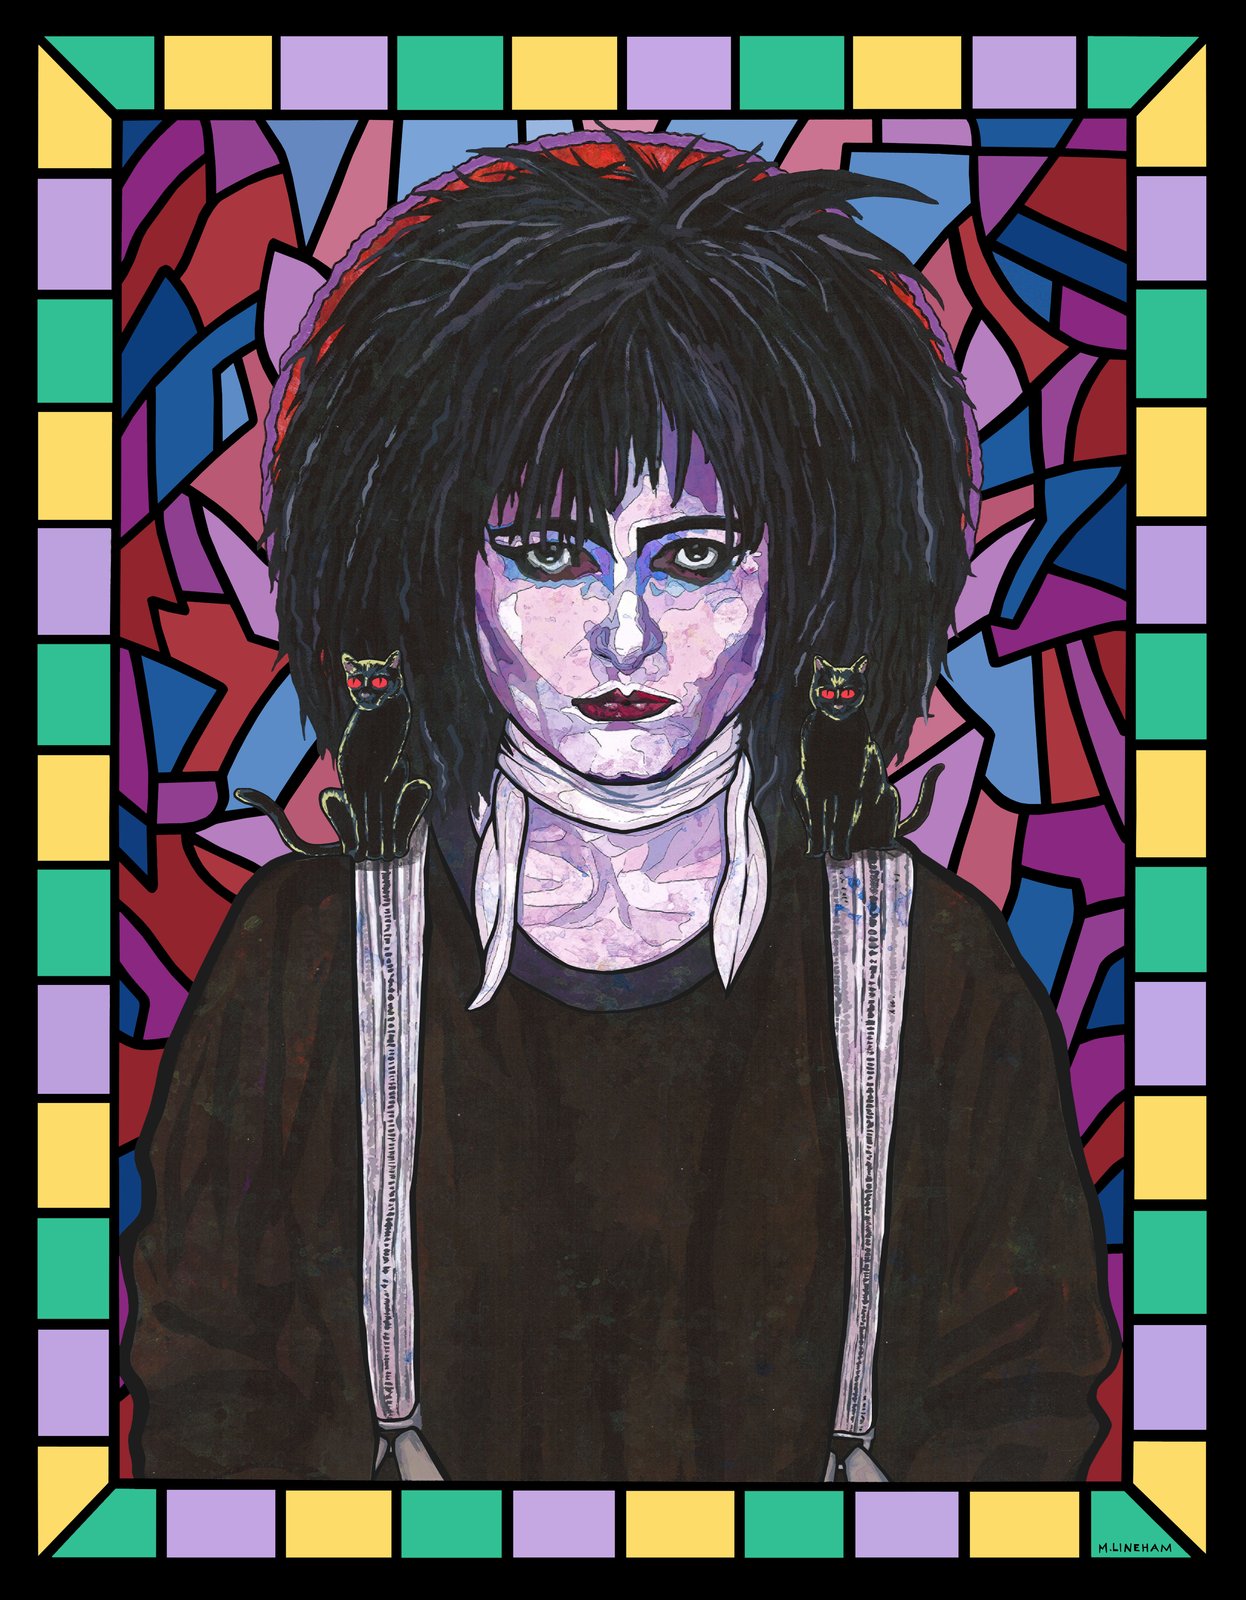 Siouxsie and the banshees midi files